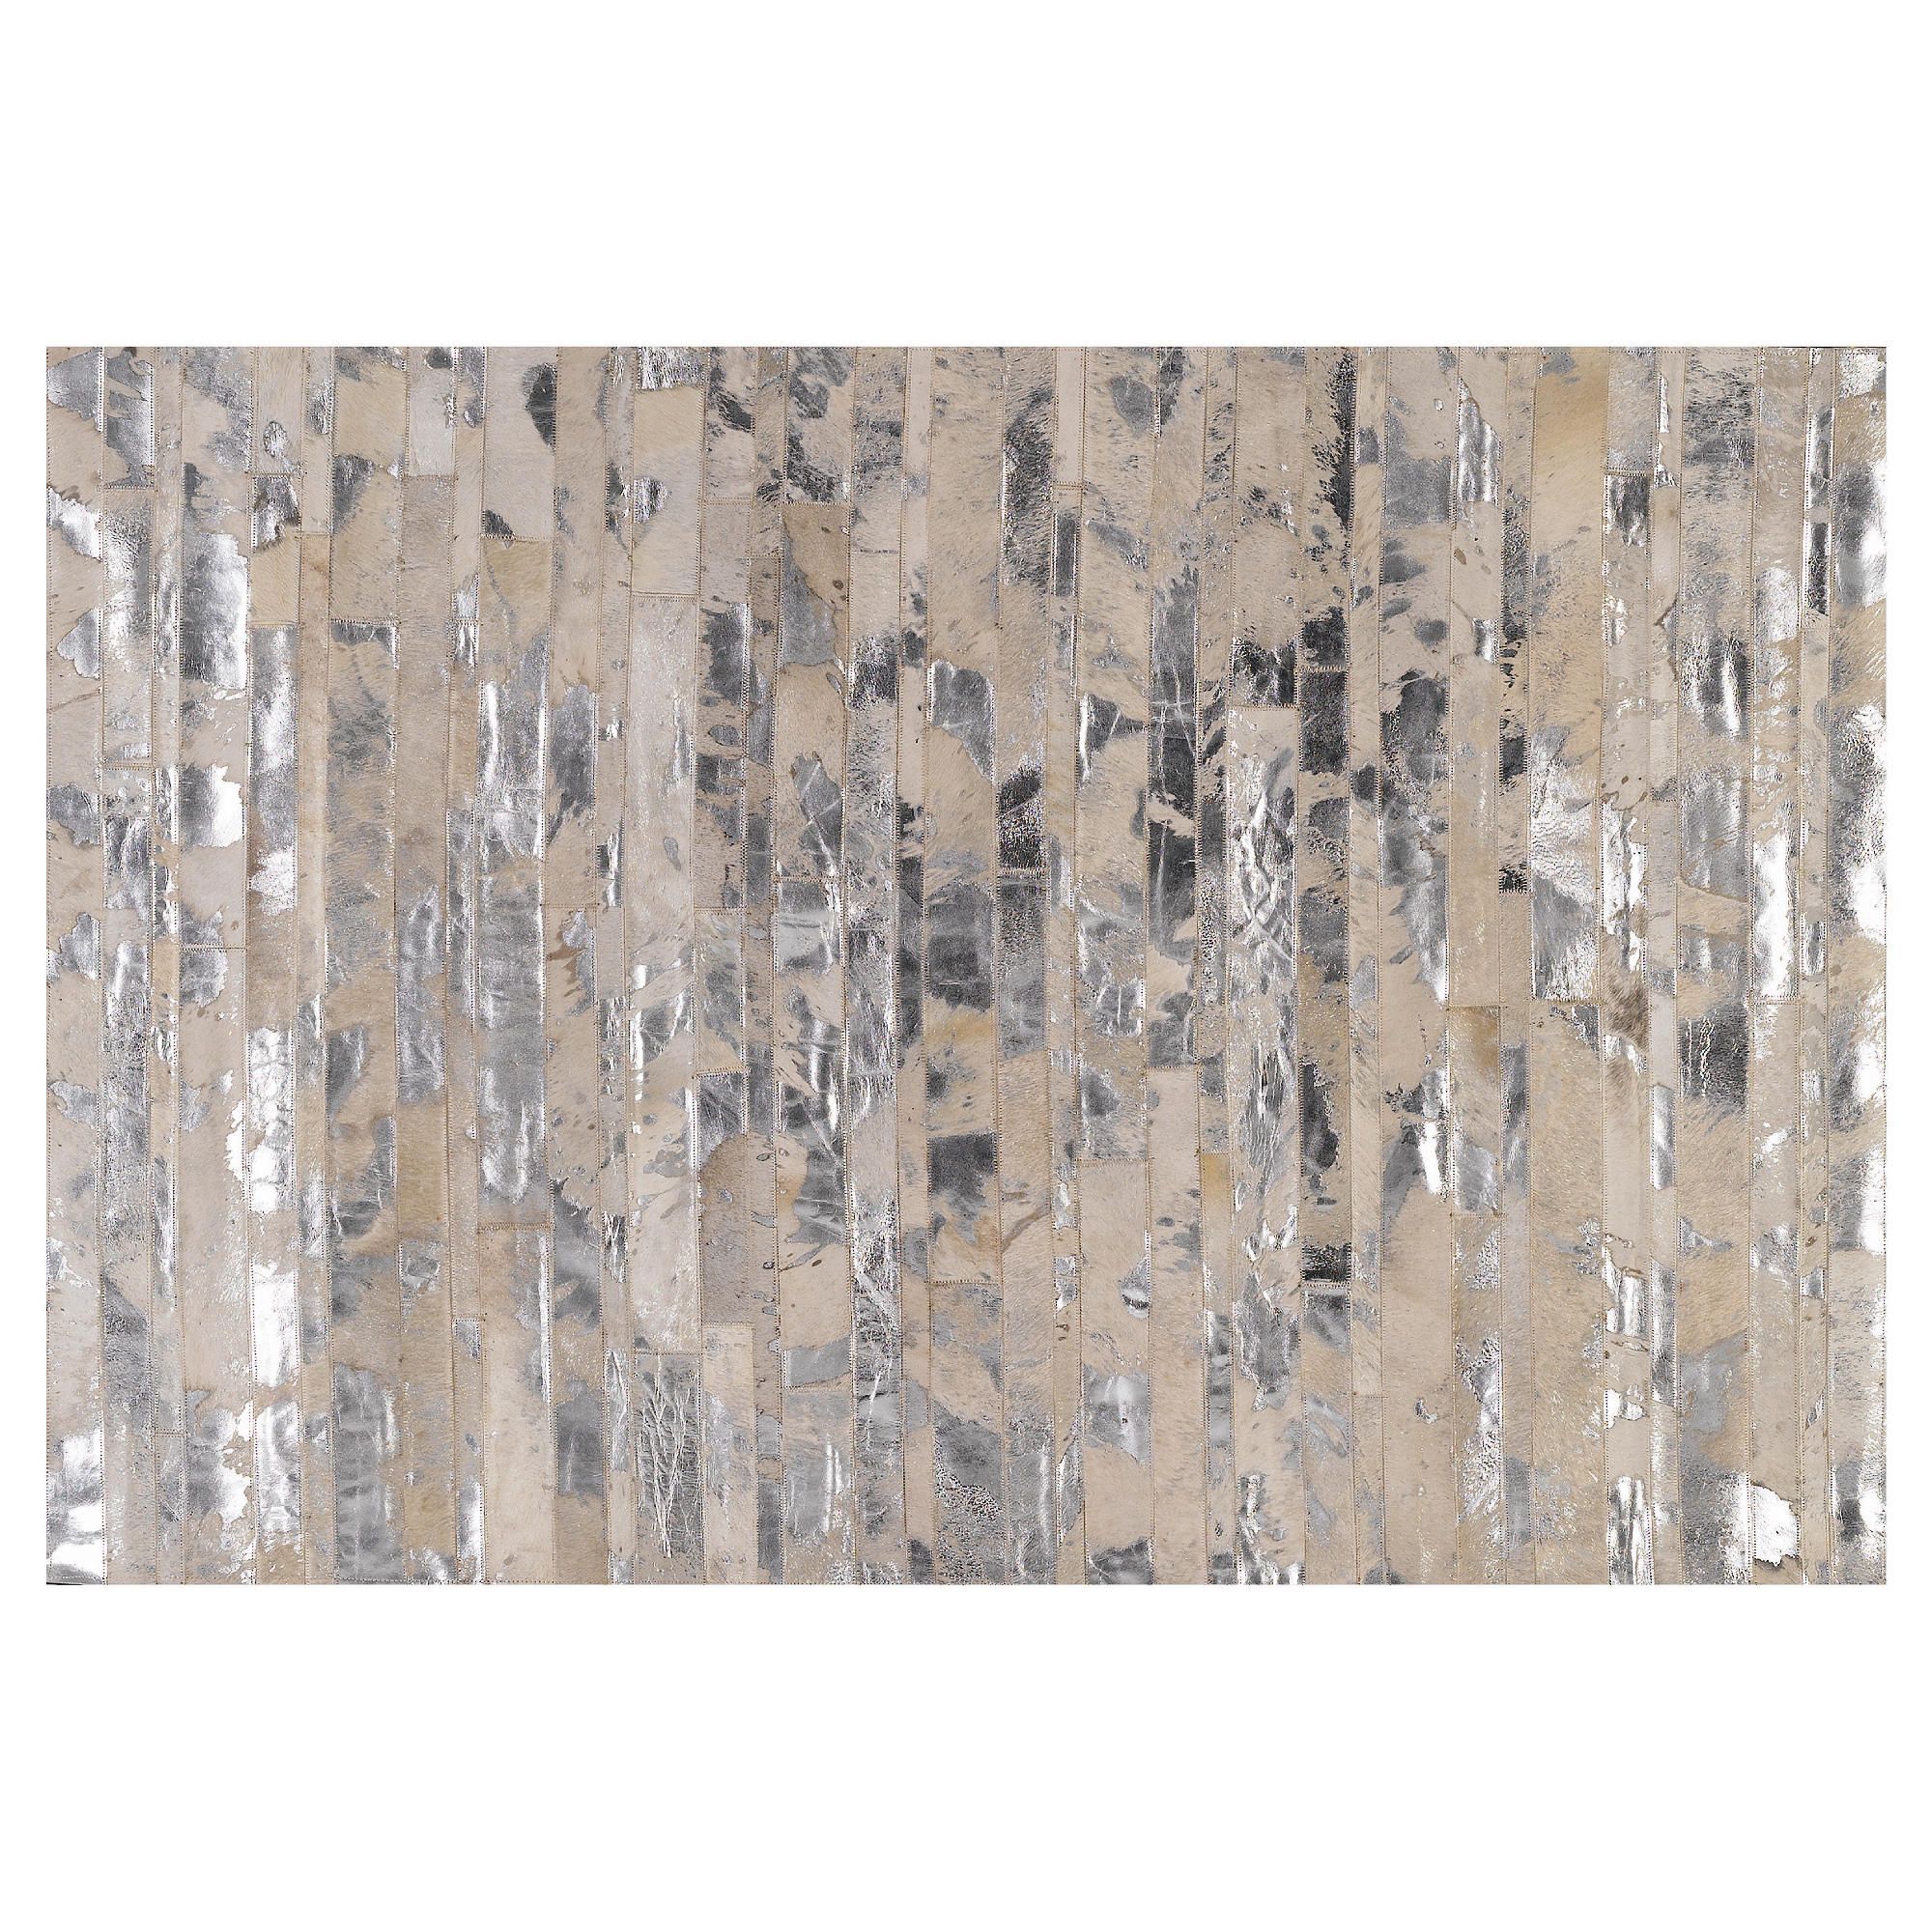 Patchwork Cowhide Rug 120 X 180cm at Tesco Direct